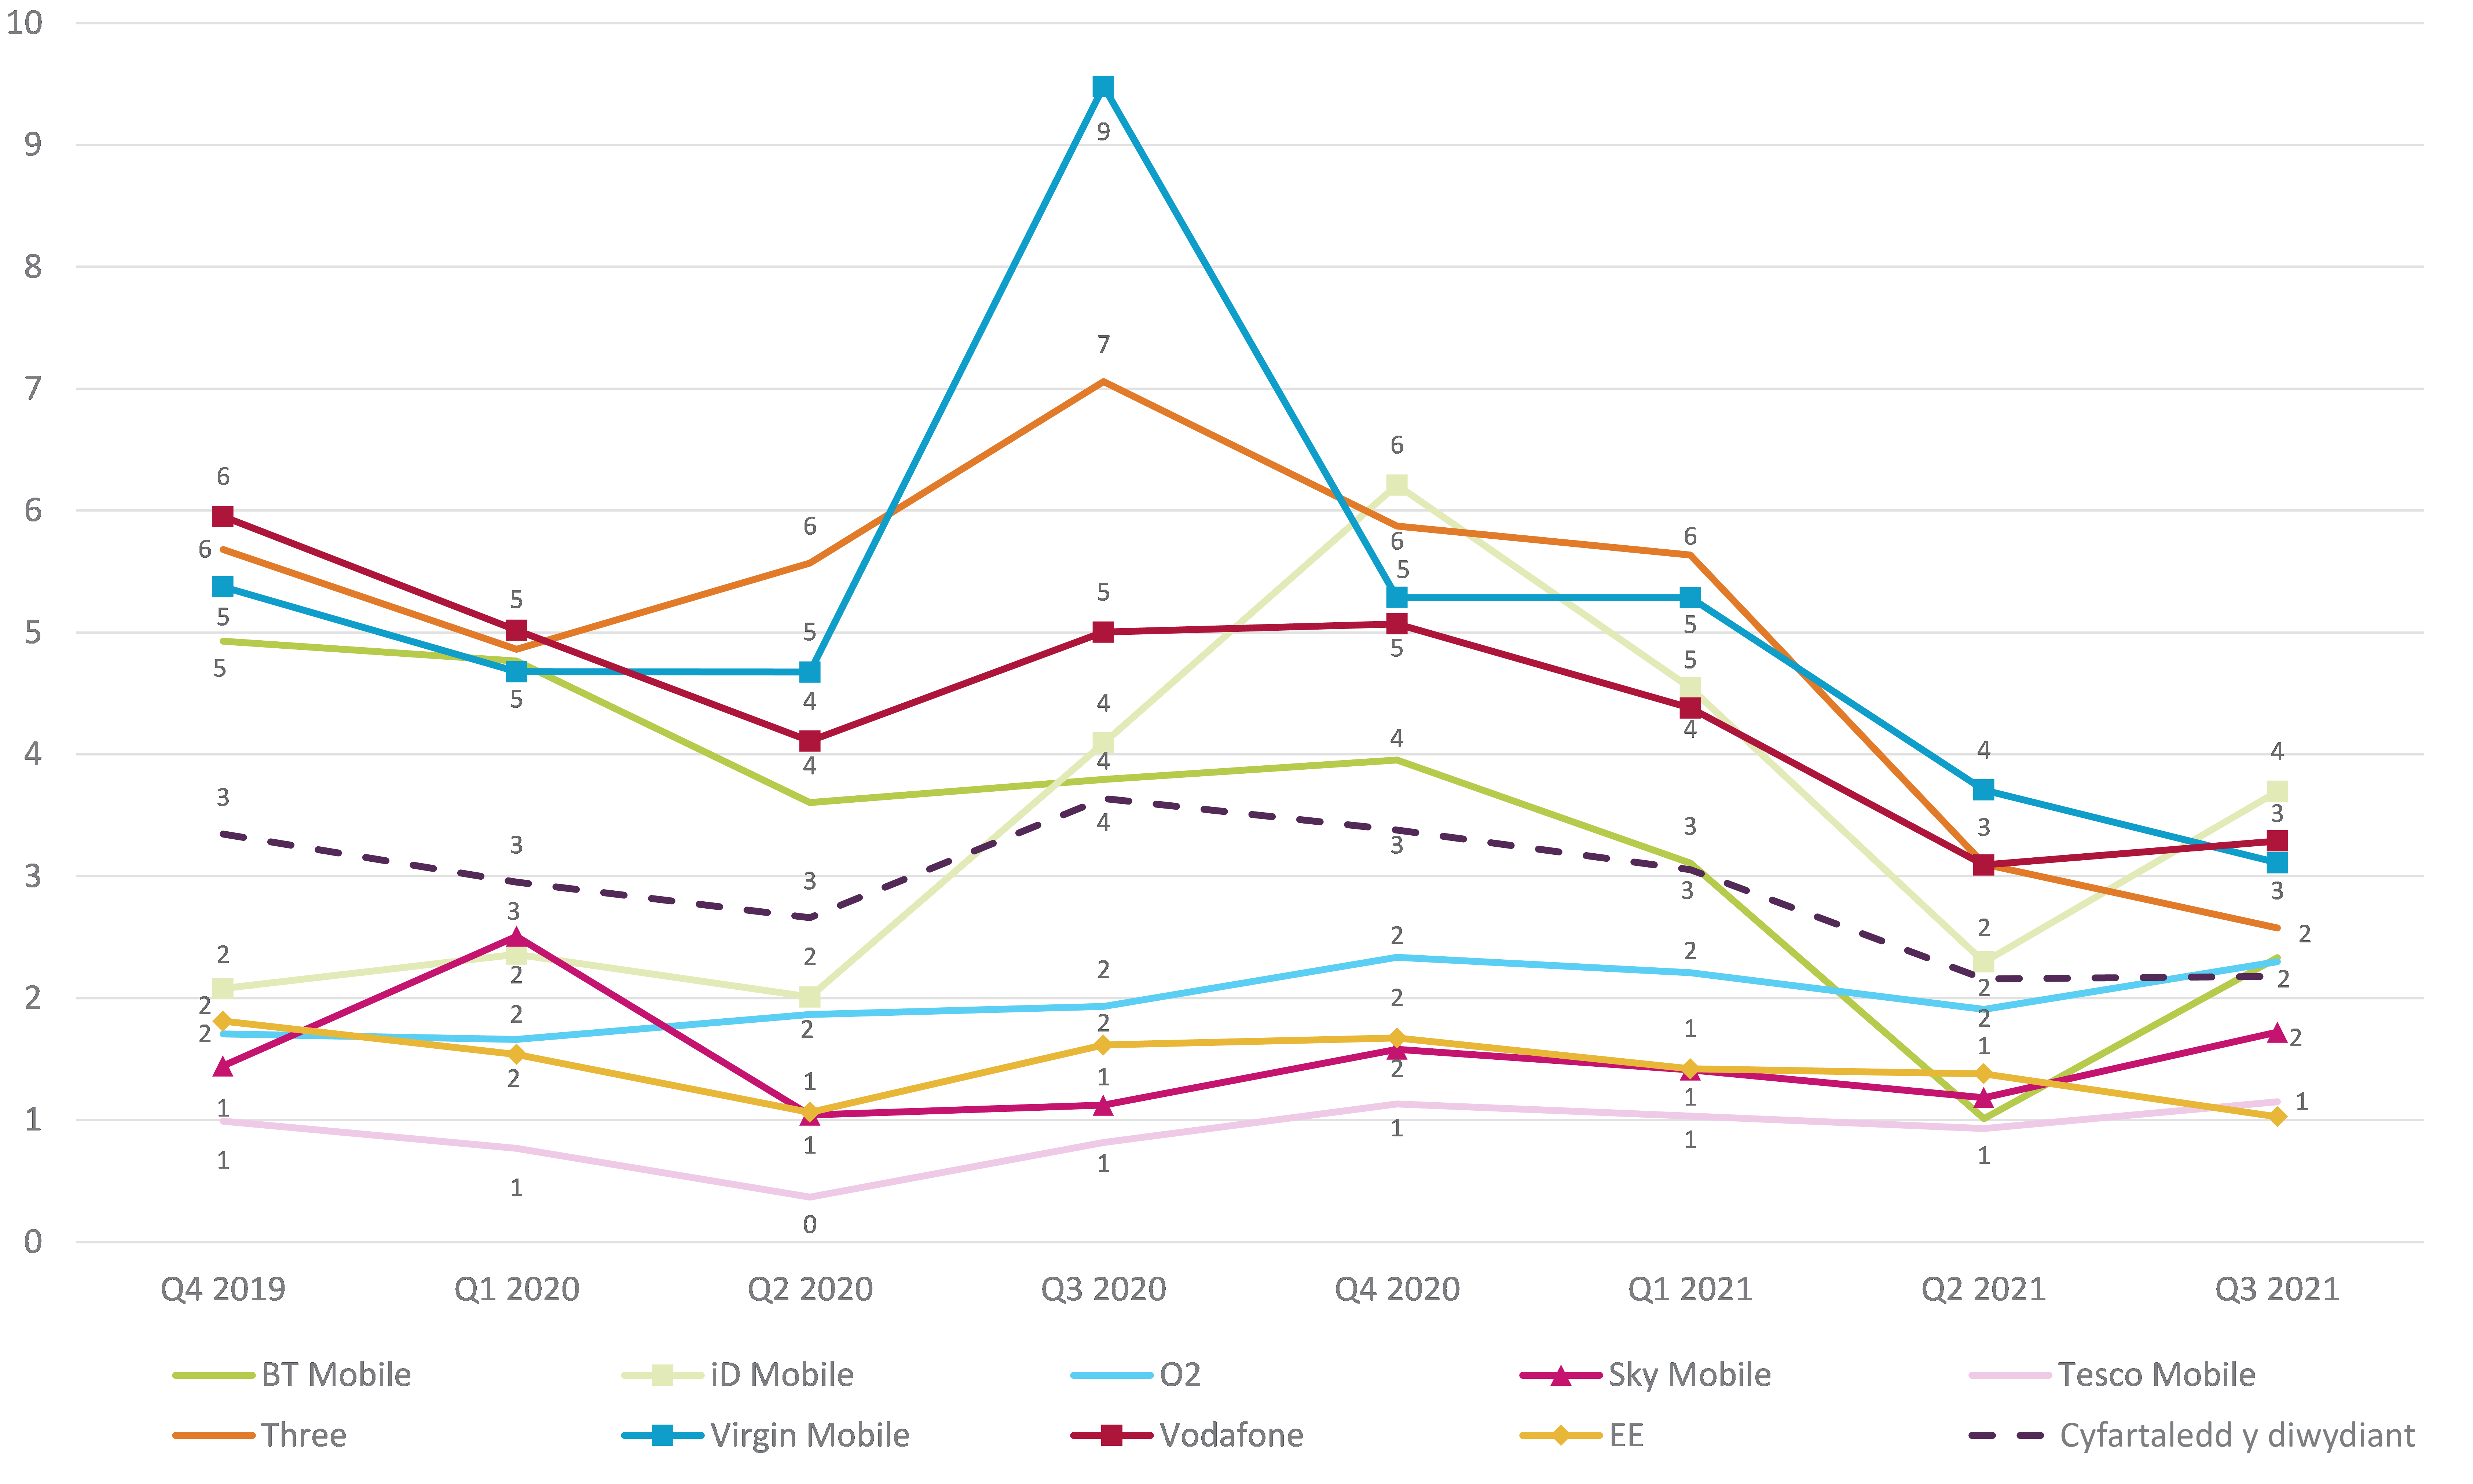 Graph showing trend data on residential consumer complaints received by Ofcom across pay-monthly mobile by communications provider. It shows the pay-monthly mobile complaints per 100,000 subscribers for the Q4 2019 – Q3 2021 period. iD Mobile generated the highest volume of pay-monthly mobile complaints (at 4) in Q3 2021 followed by Vodafone and Virgin Mobile at 3. EE and Tesco Mobile generated the lowest volume of complaints at 1.